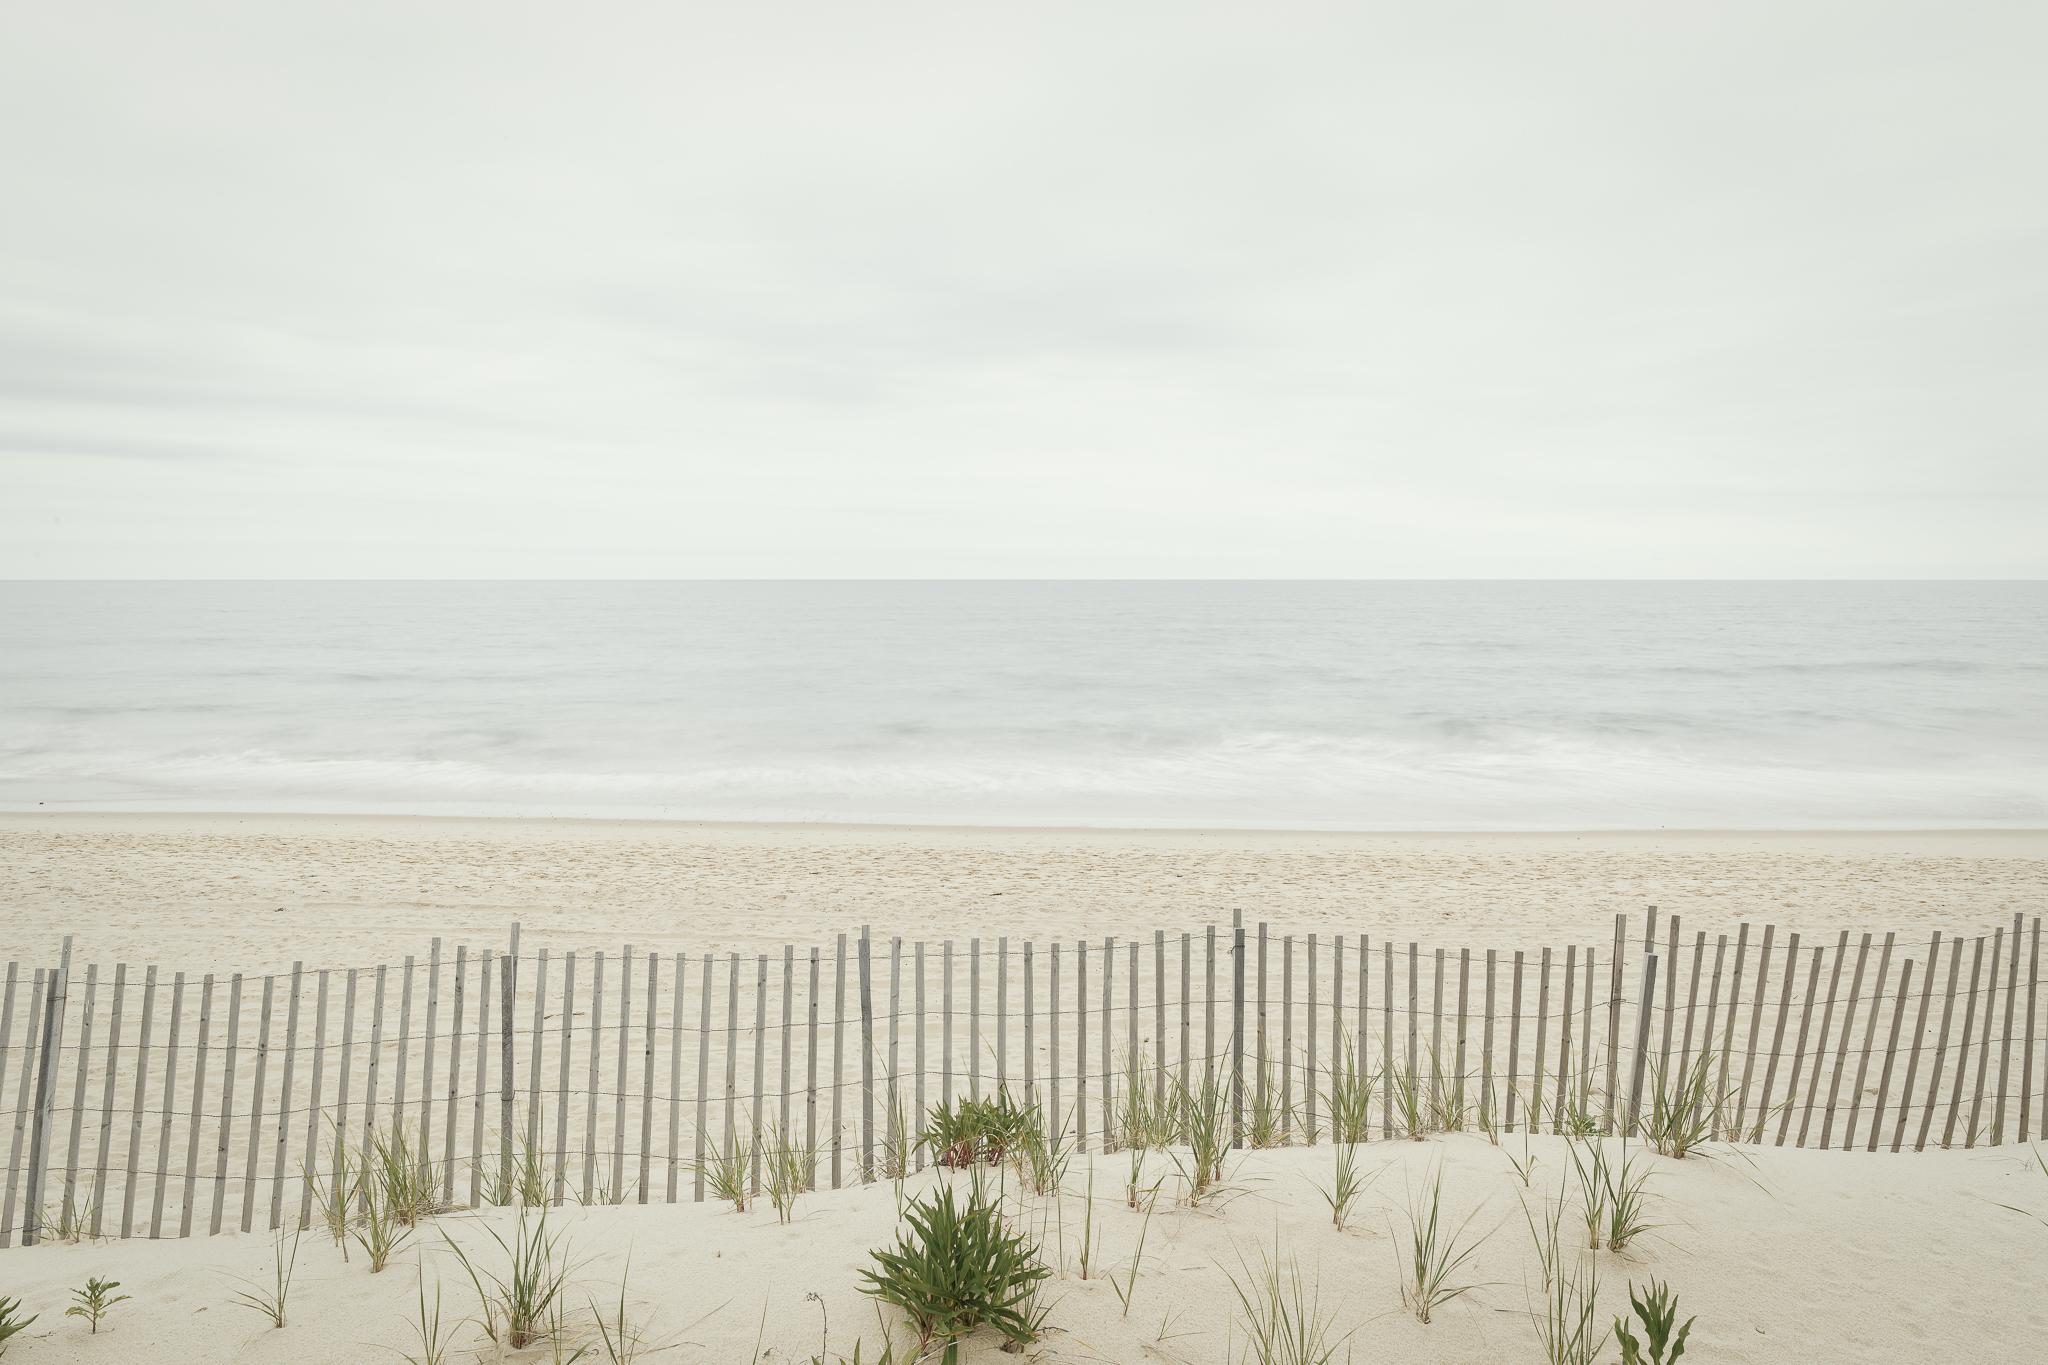 This contemporary coastal photograph features a light, neutral palette. It captures a New England beach scene, with a wooden fence in the sand in the foreground, and the ocean shore behind it, with a soft and serene overall aesthetic. 

This is a